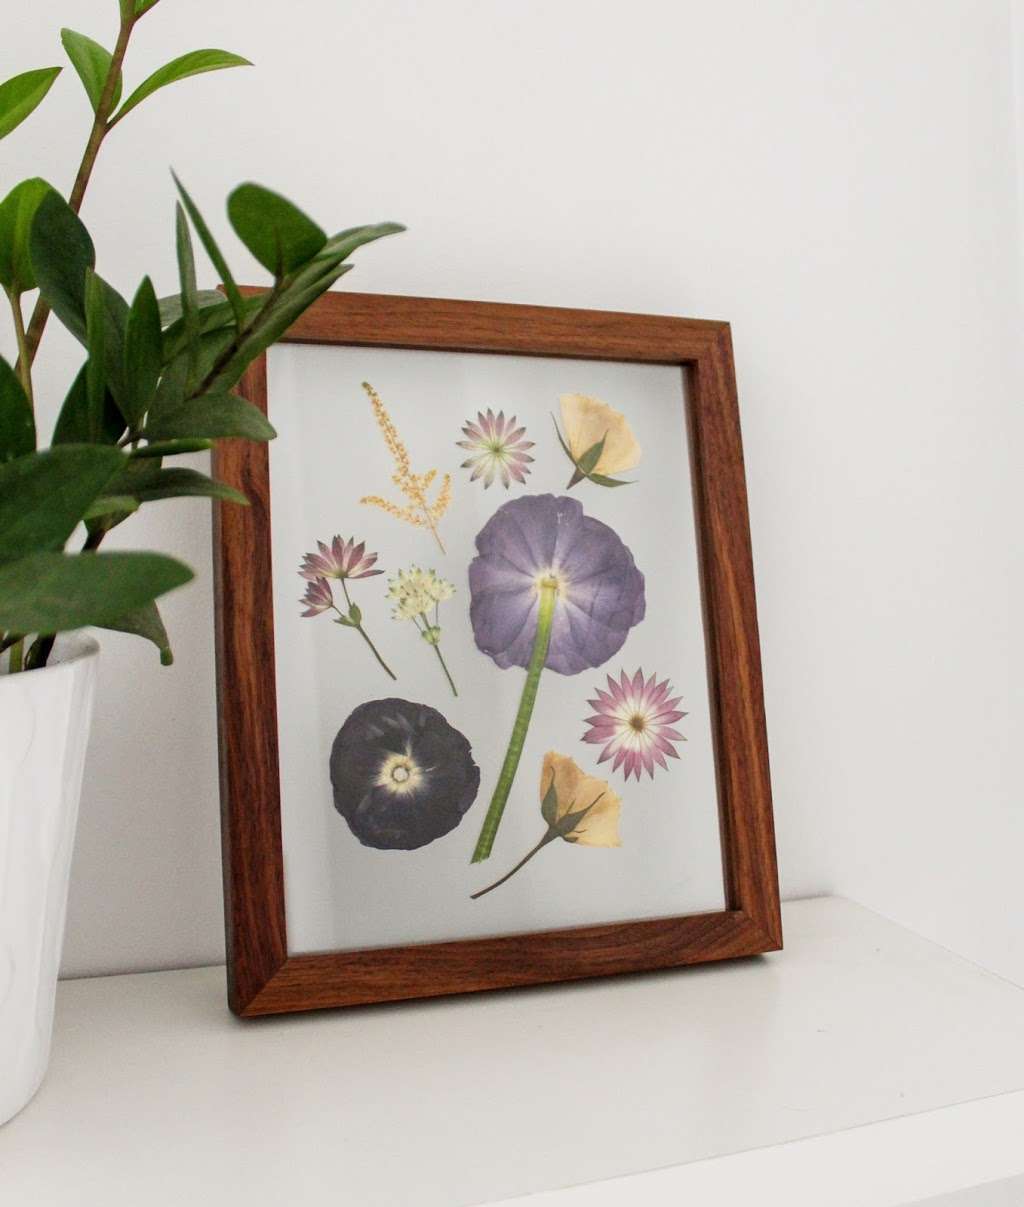 Framed Florals | Photo 8 of 10 | Address: 67 West St suite 325, Brooklyn, NY 11222, USA | Phone: (914) 719-7931